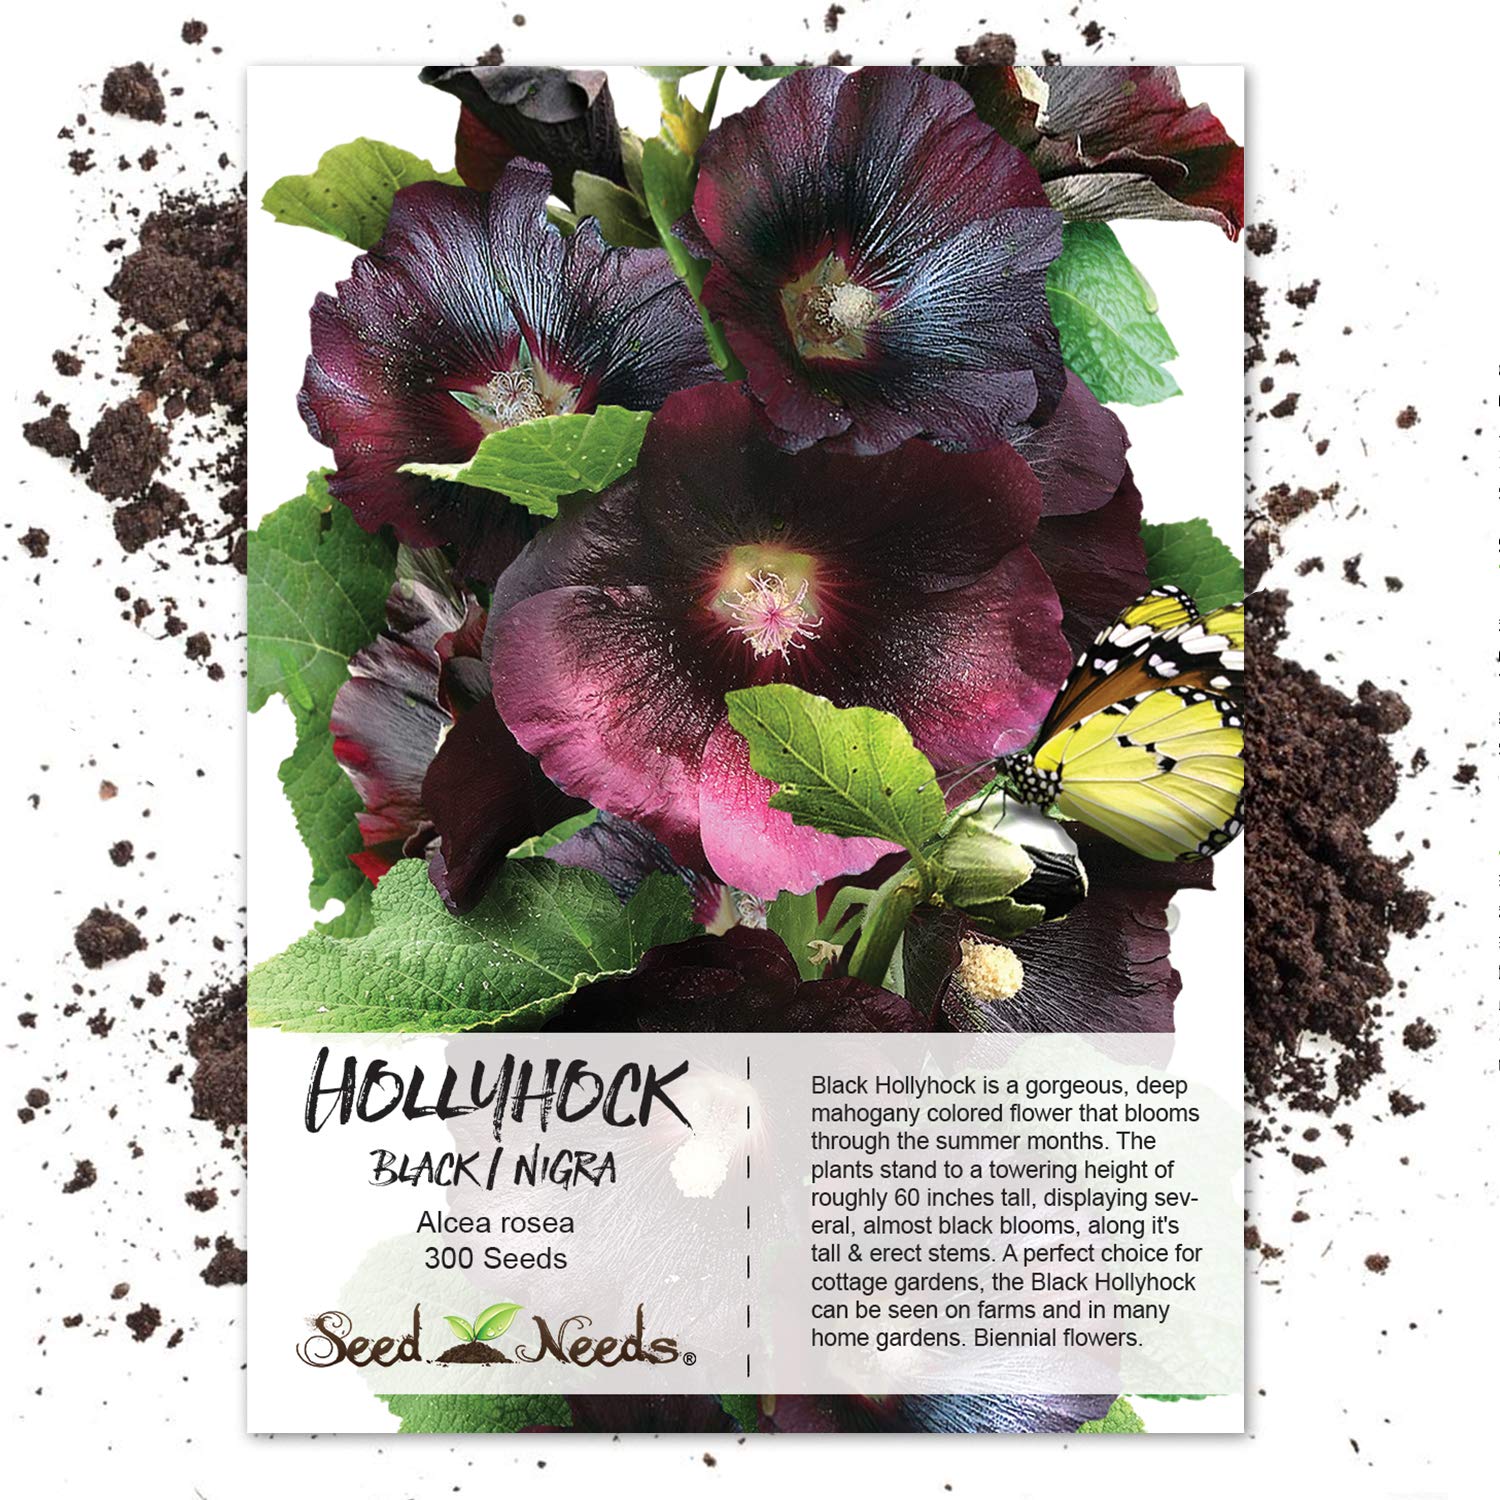 A perfect choice for cottage gardens, the Black Hollyhock can be seen on farms and in many home gardens. It is popularly used as a backdrop plant and can be planted along fences as well.